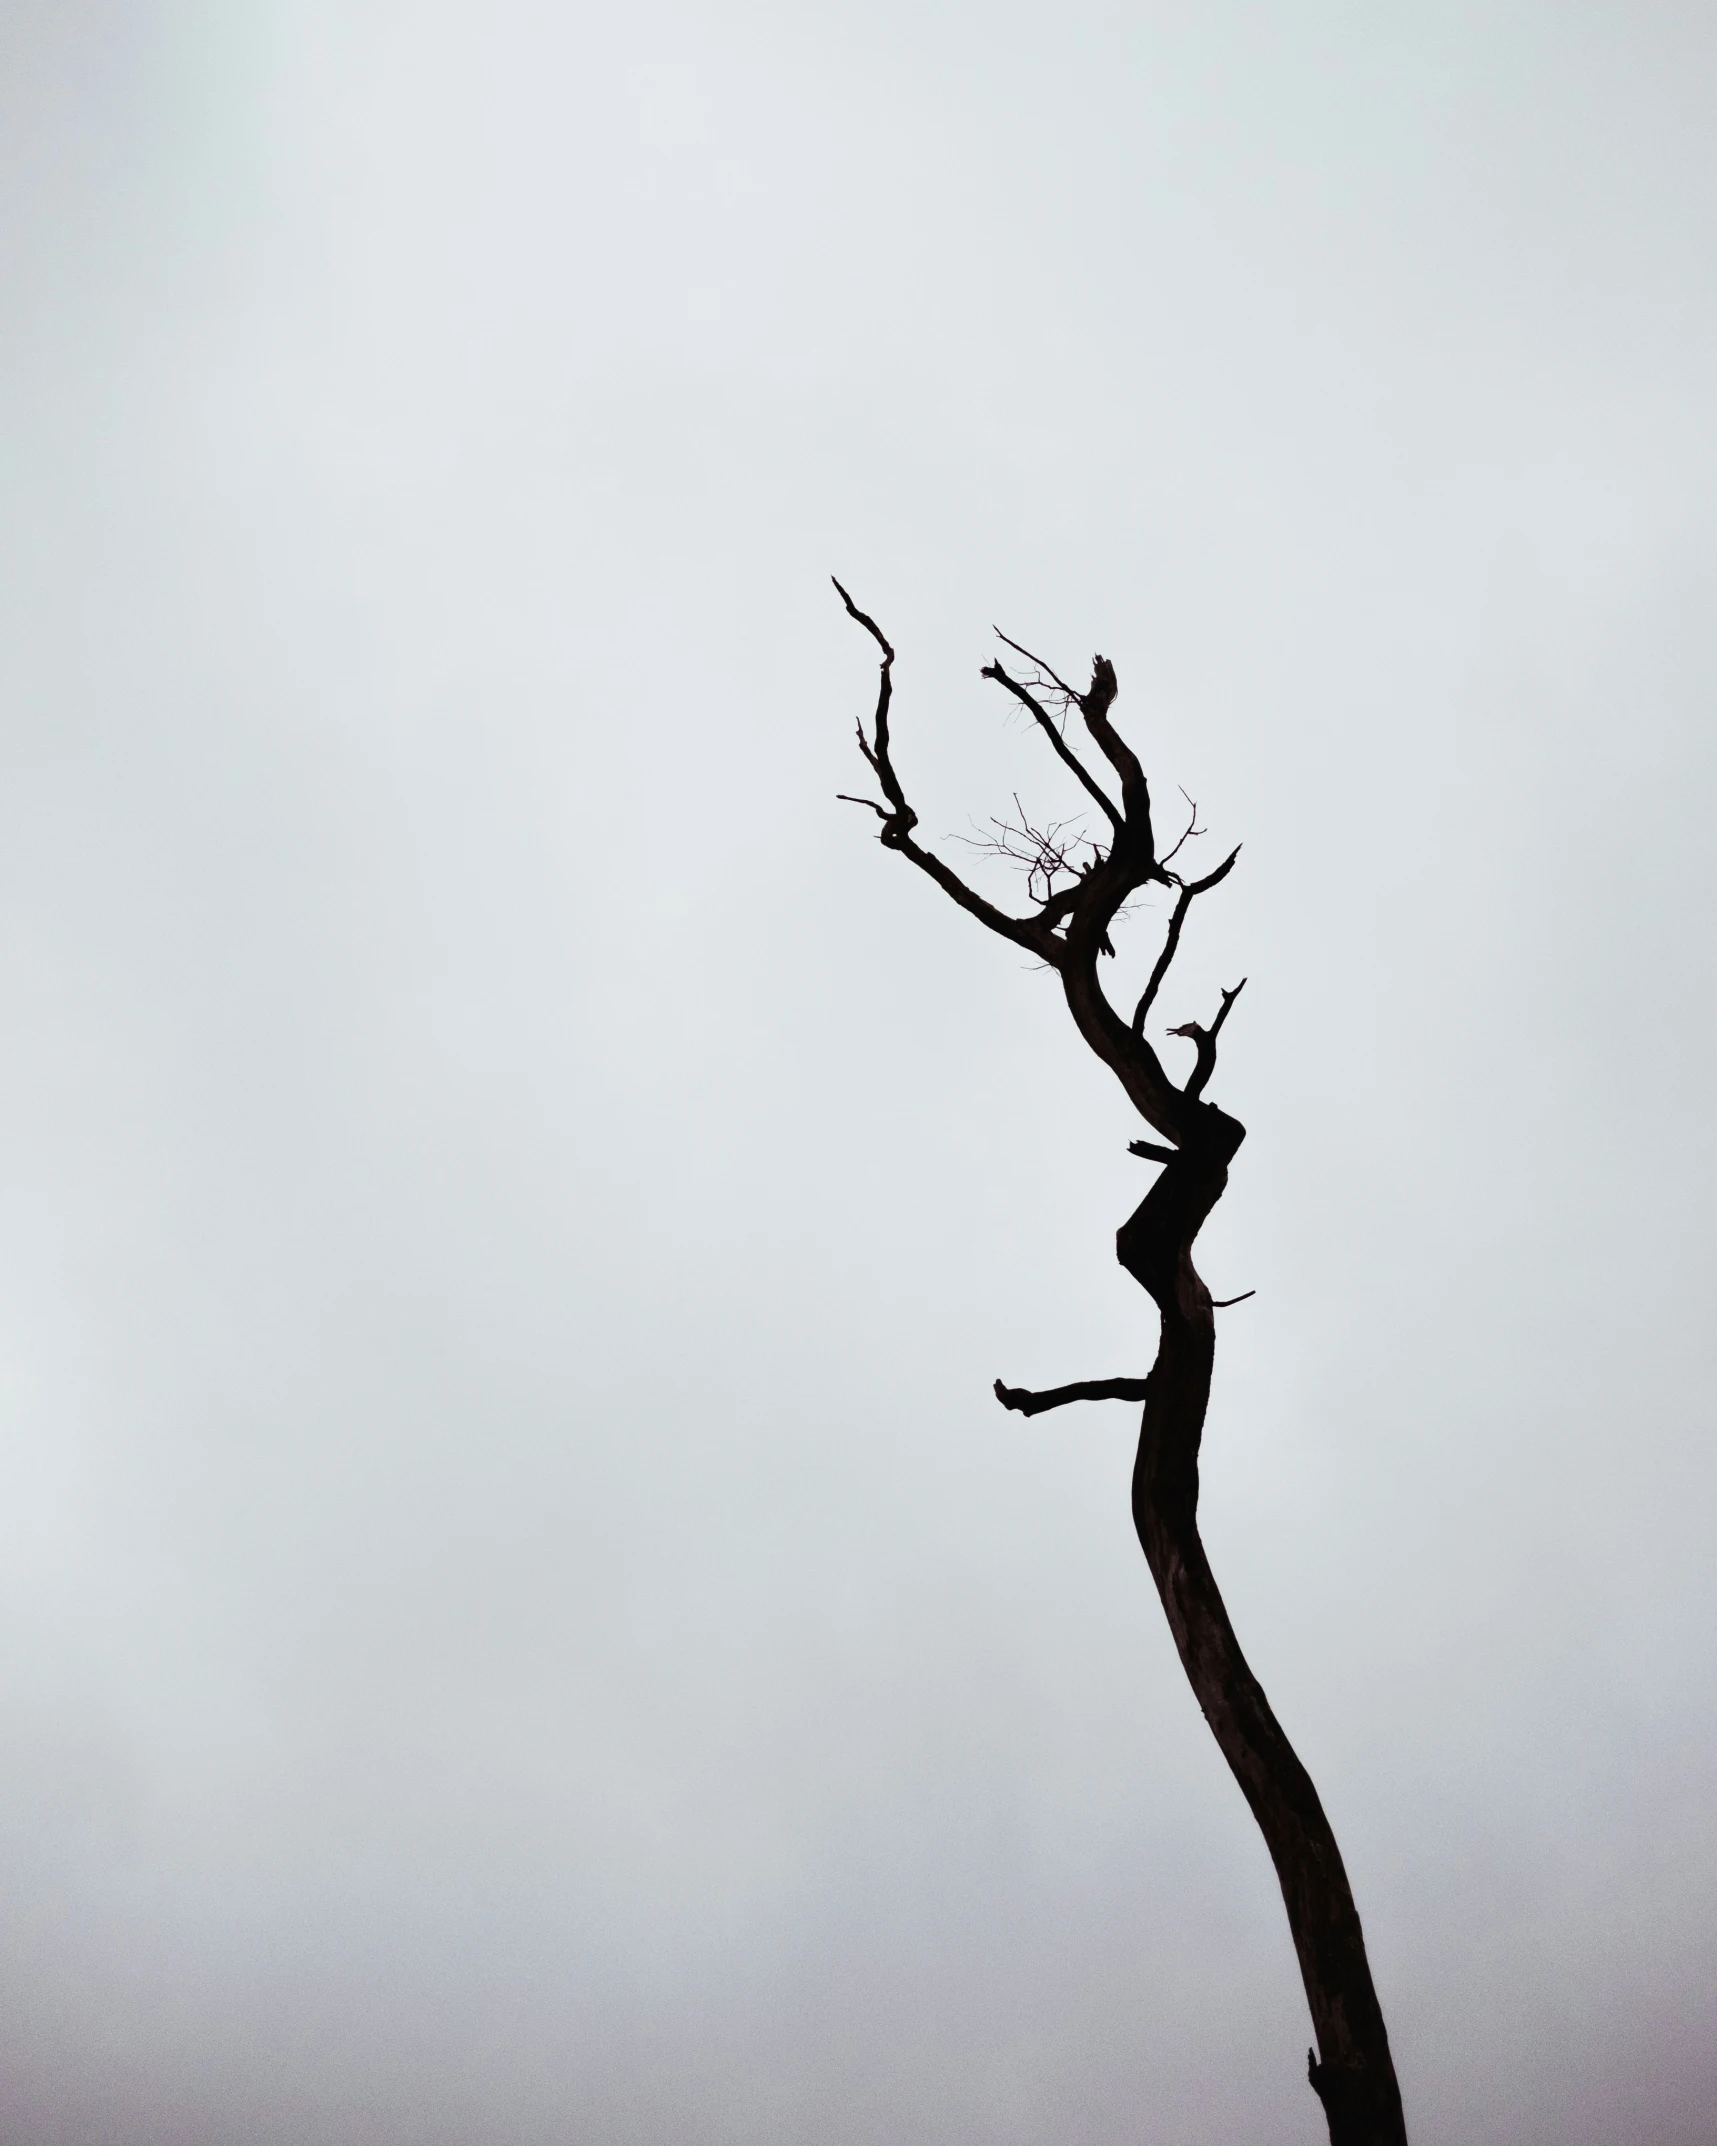 a tall dead tree with nches is against a cloudy sky